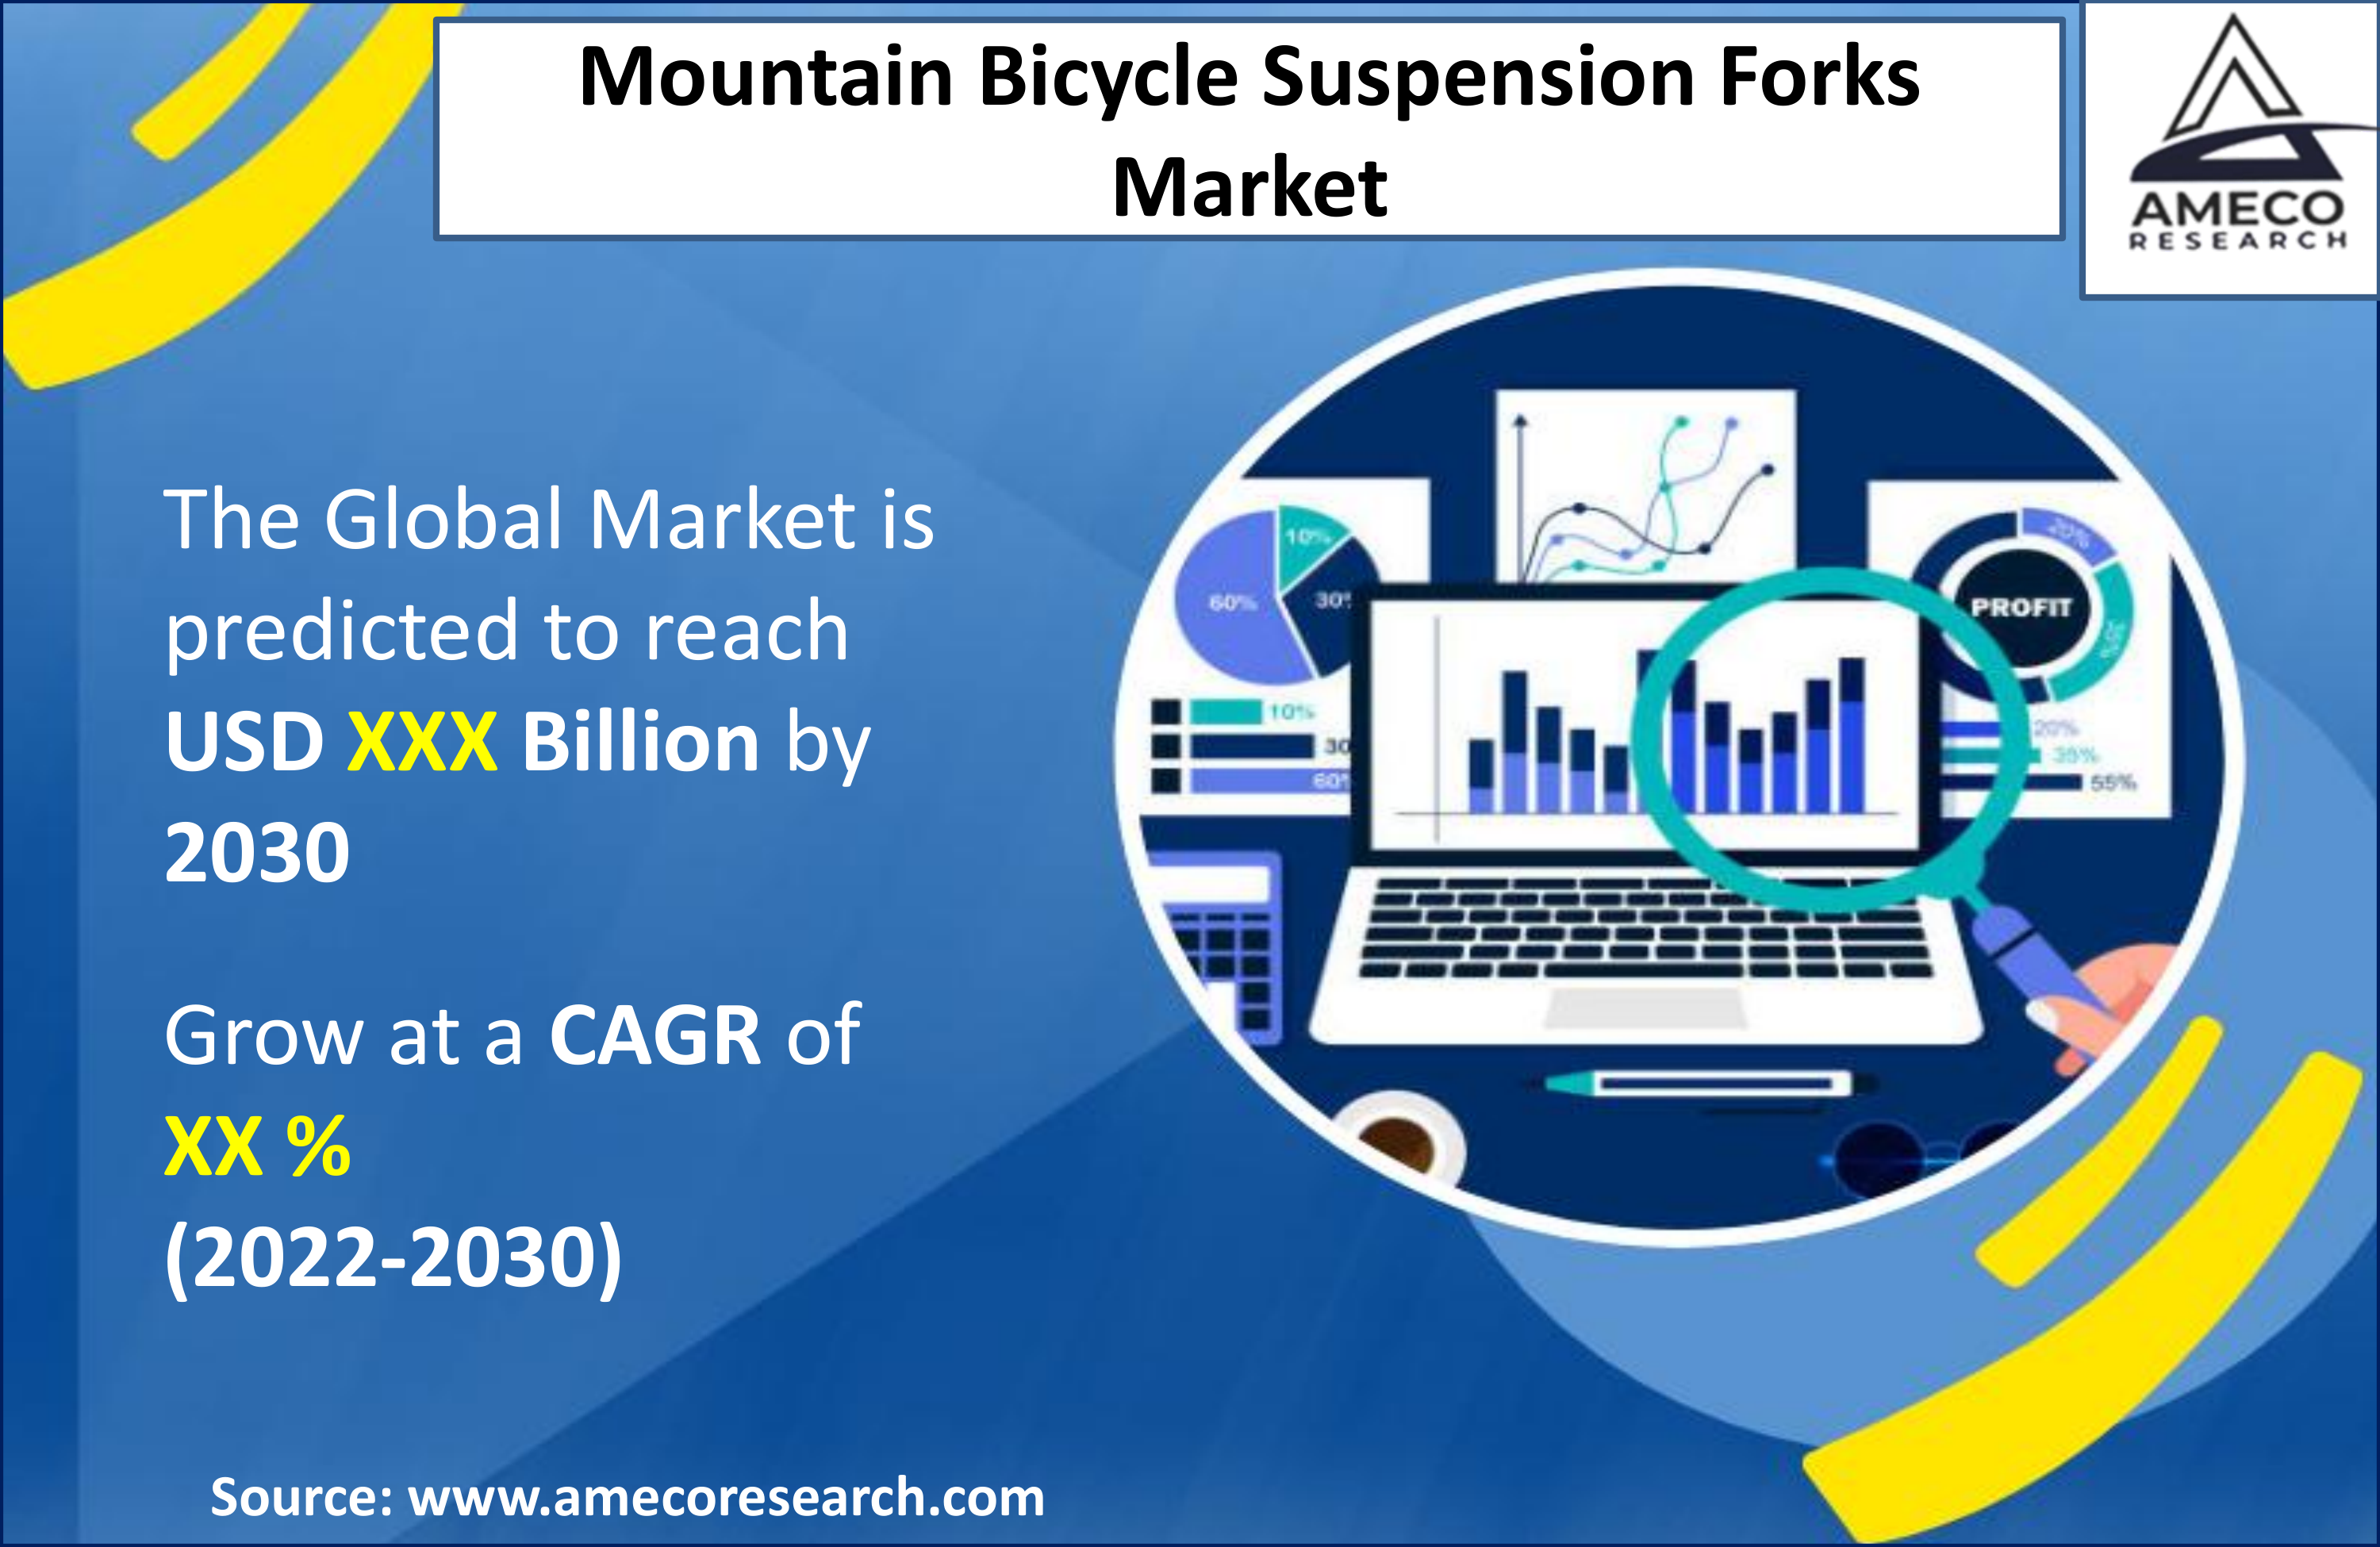 Mountain Bicycle Suspension Forks Market